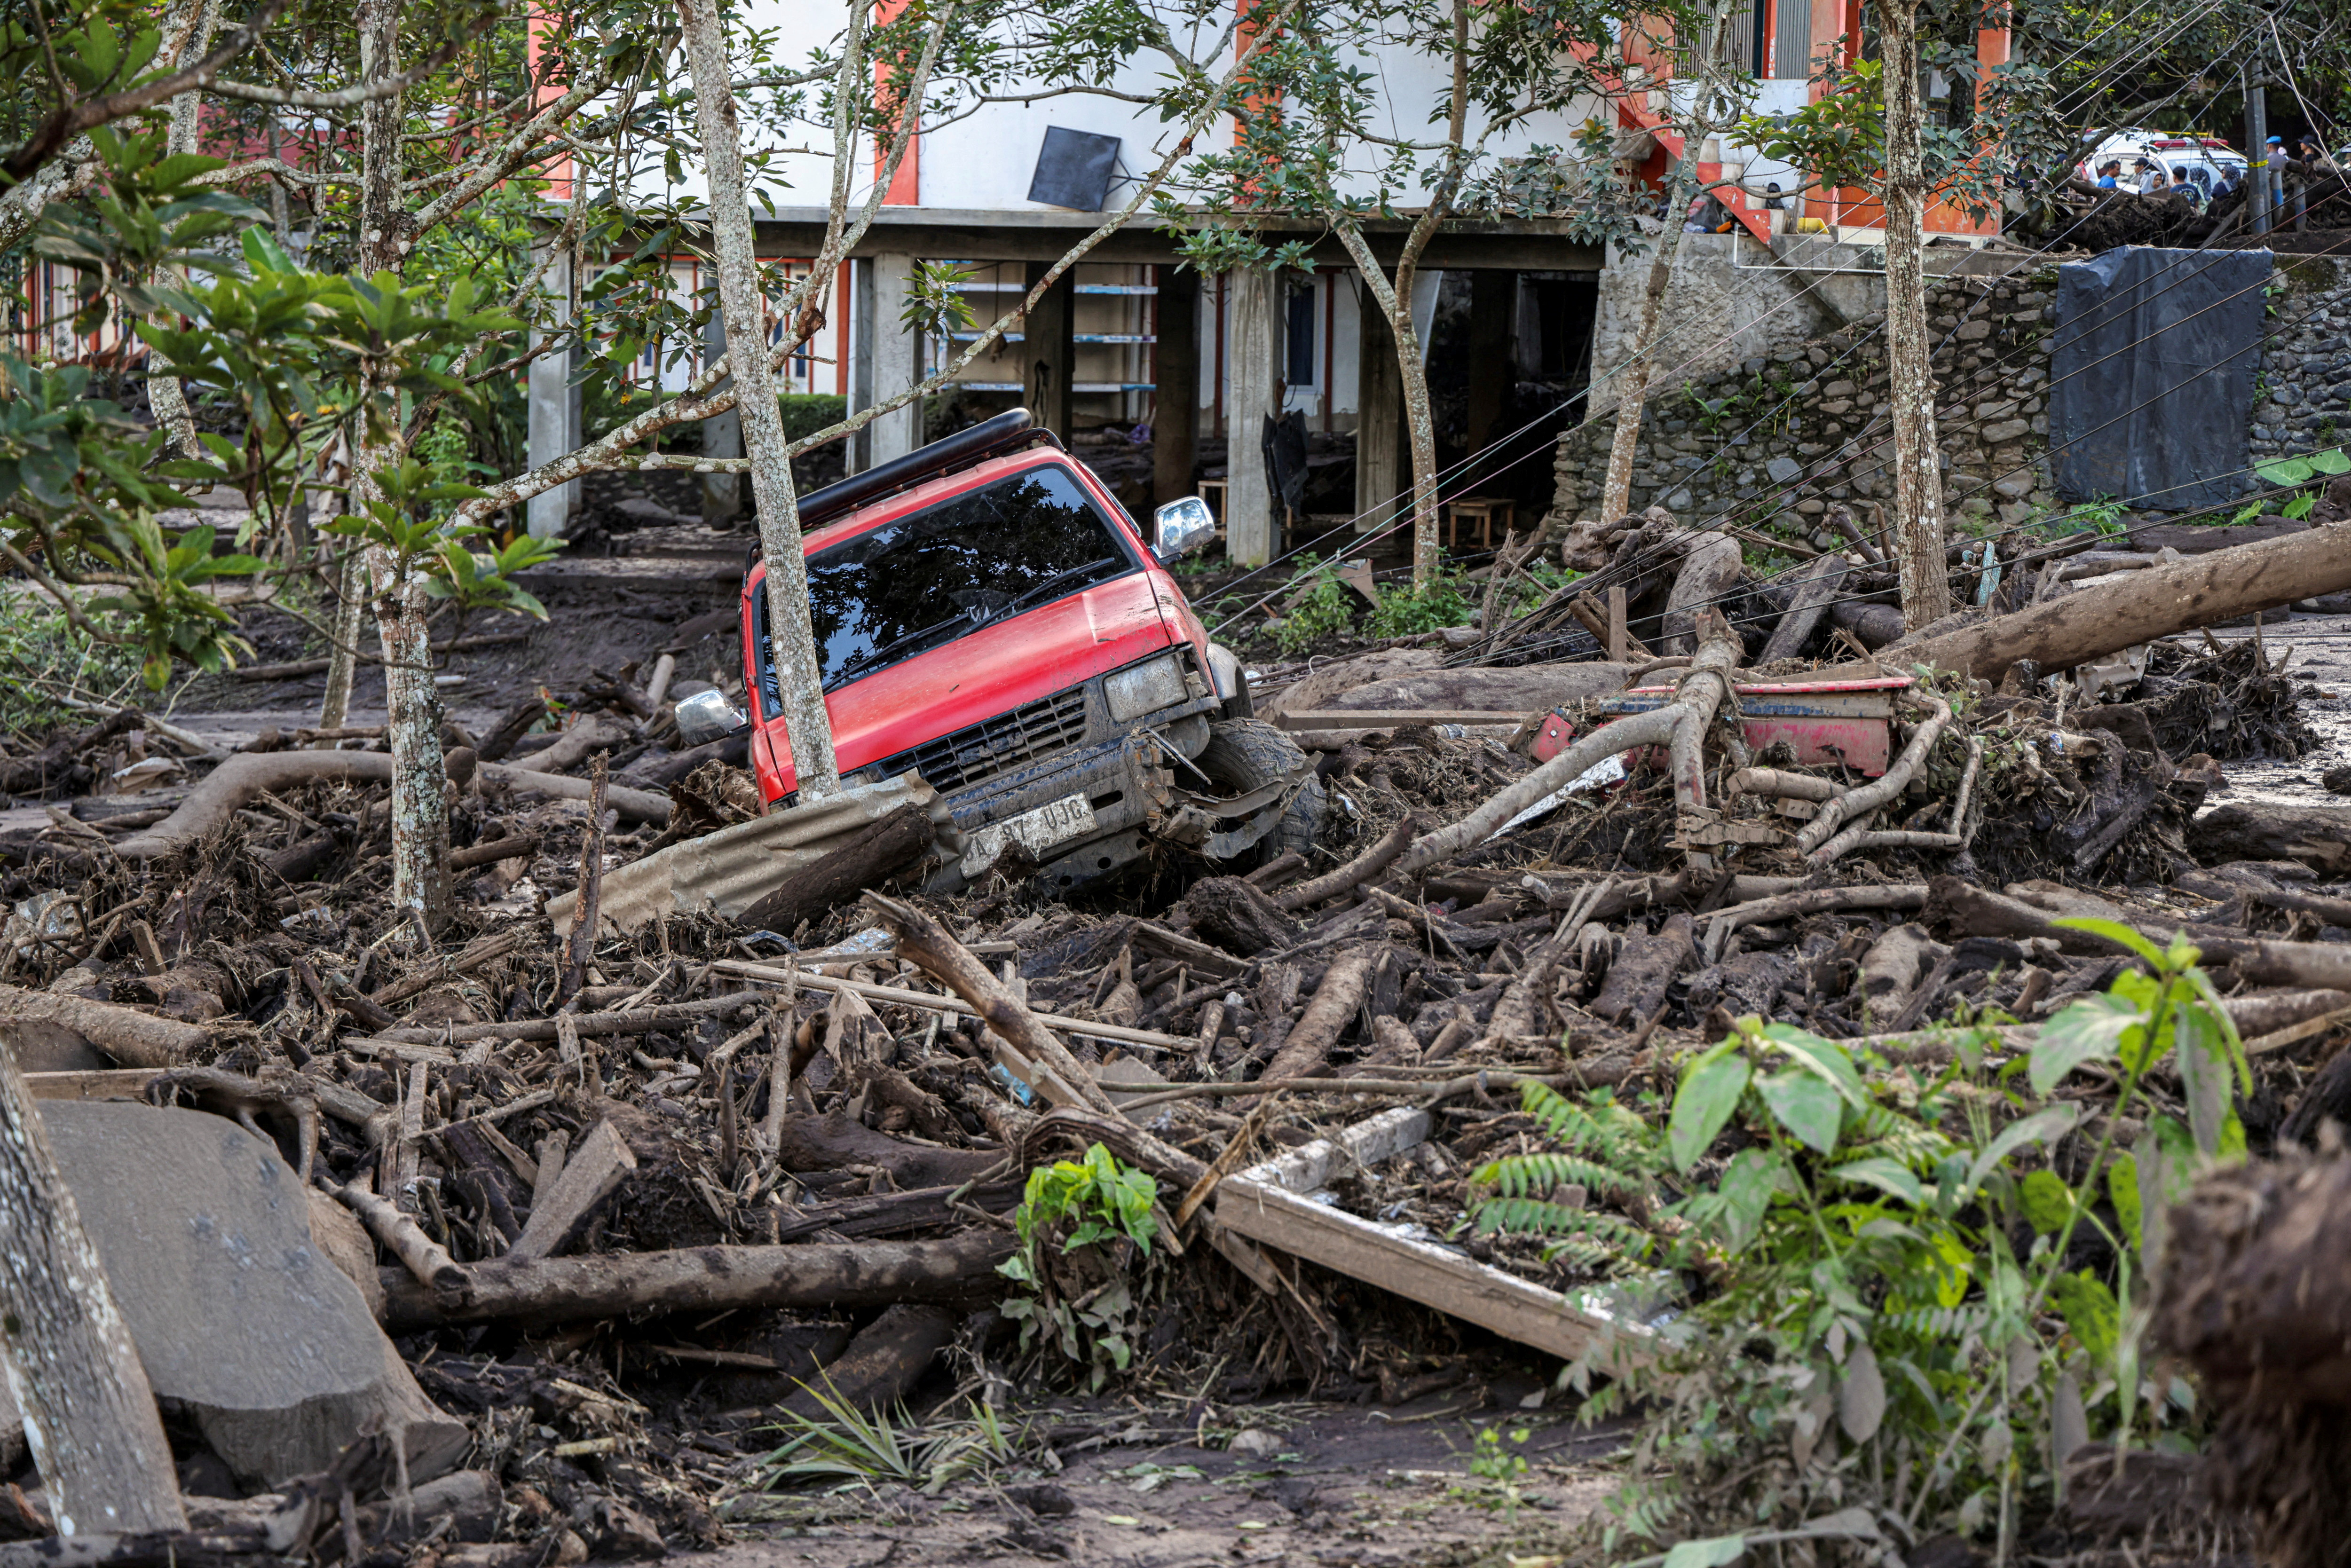 A damaged car is seen in an area affected by heavy rain brought flash floods and landslides in Tanah Datar